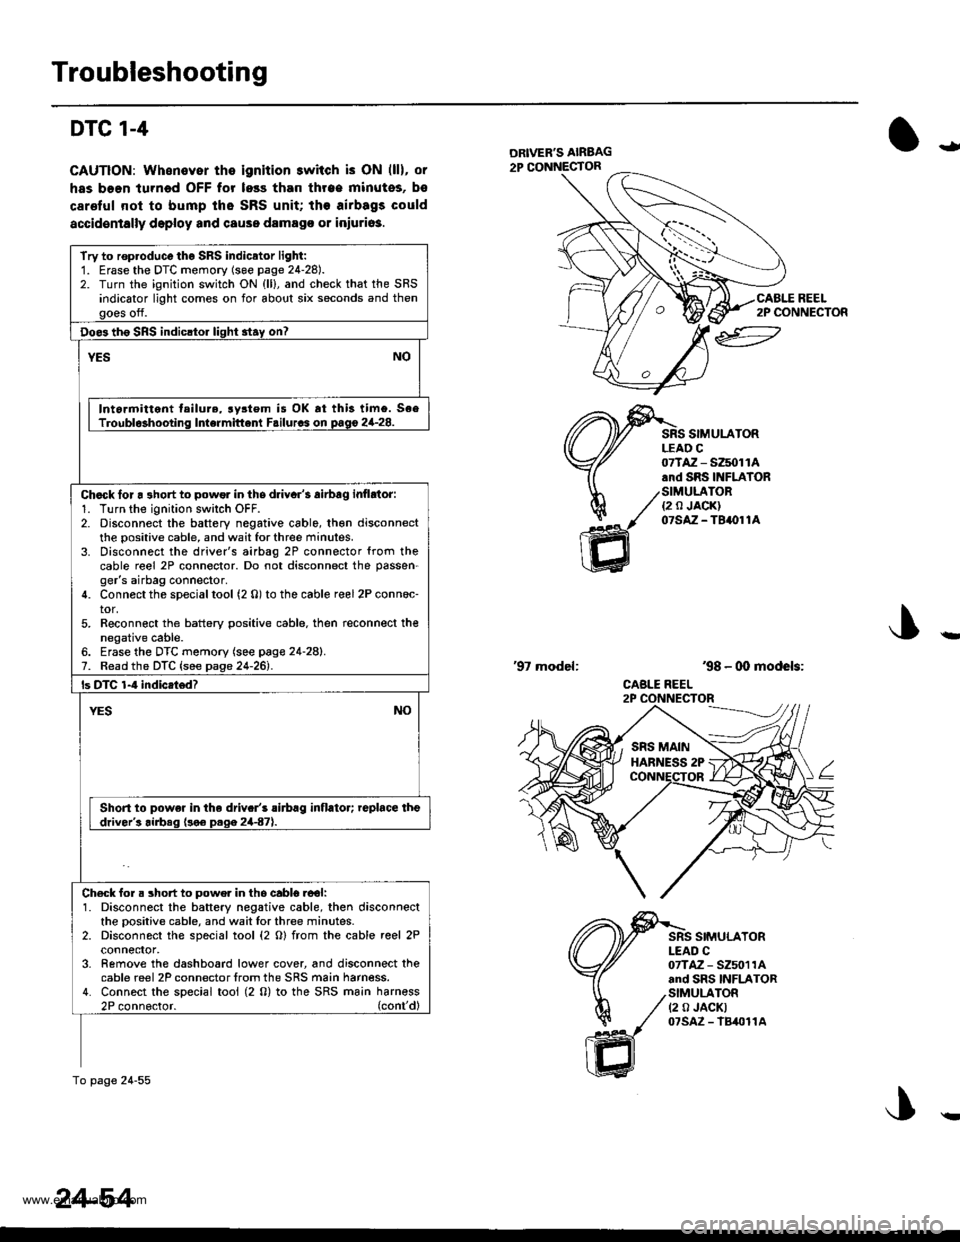 HONDA CR-V 2000 RD1-RD3 / 1.G Service Manual 
Troubleshooting
DTC 1-4
CAUTION: Whonover the ignition switch is ON (ll), or
has boen turned OFF for less than throe minutos, bs
carelul nol to bump tho SRS unit; the airbags could
accidentally deplo